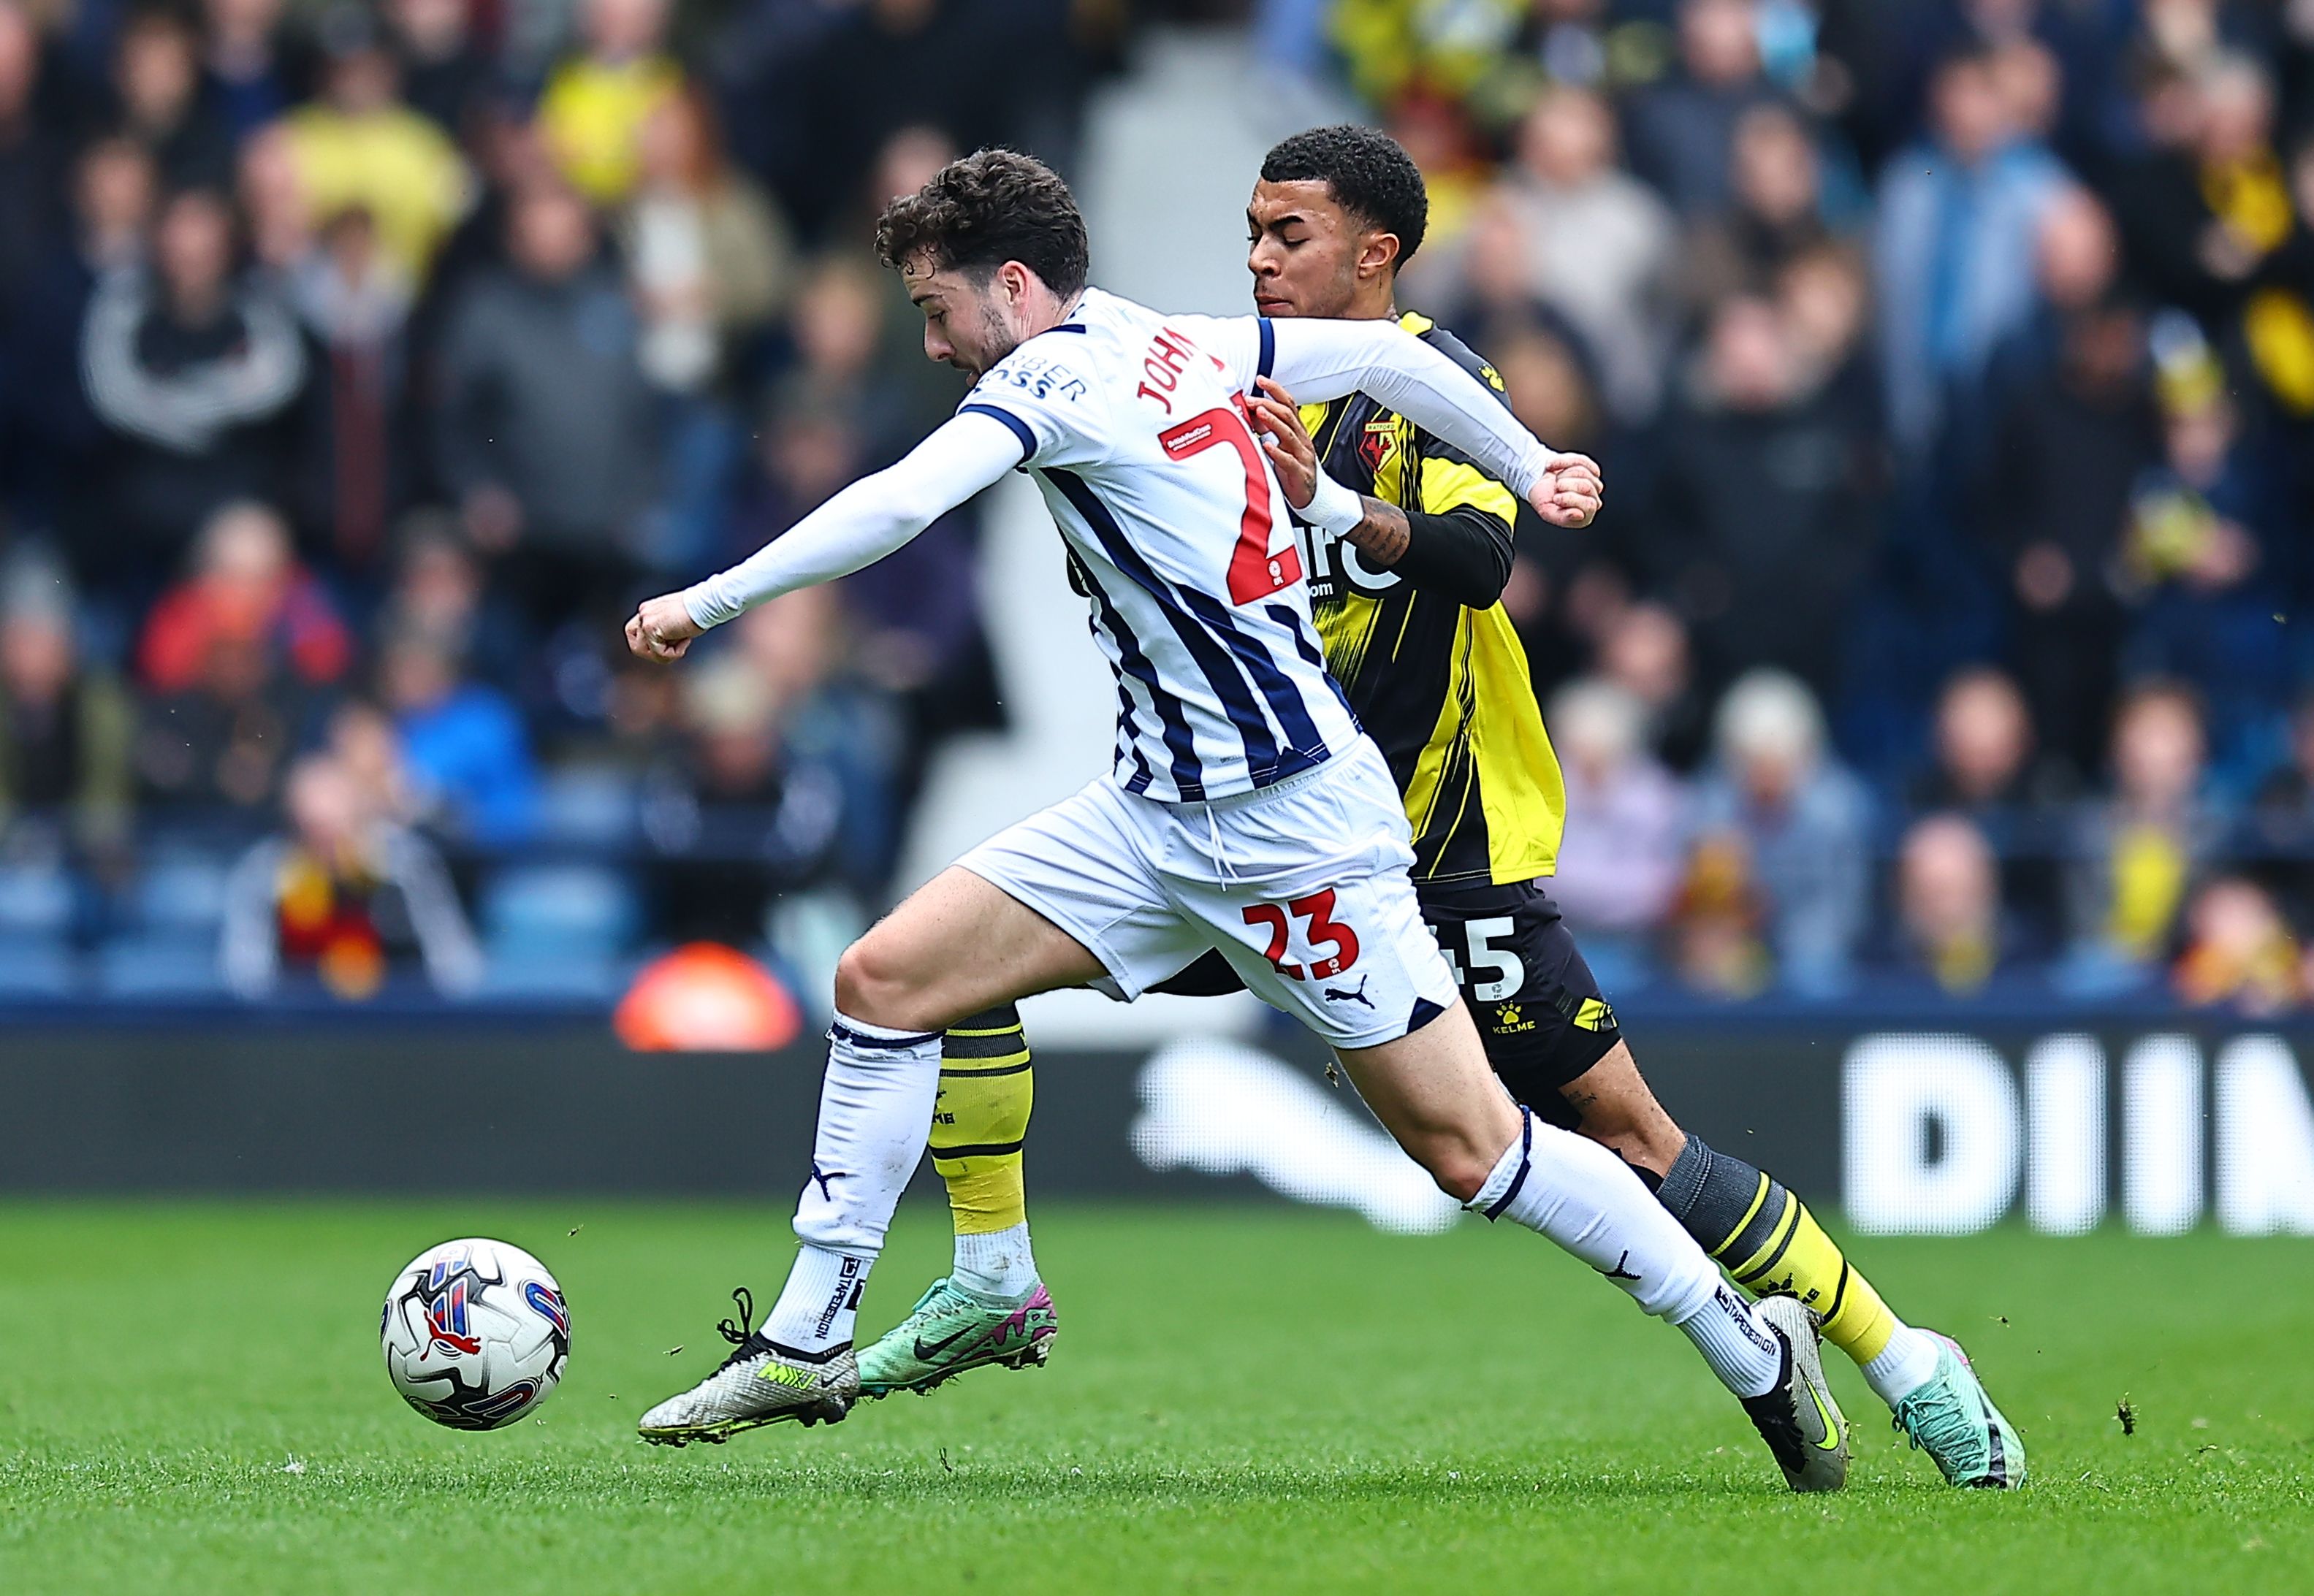 Mikey Johnston running with the ball against Watford 